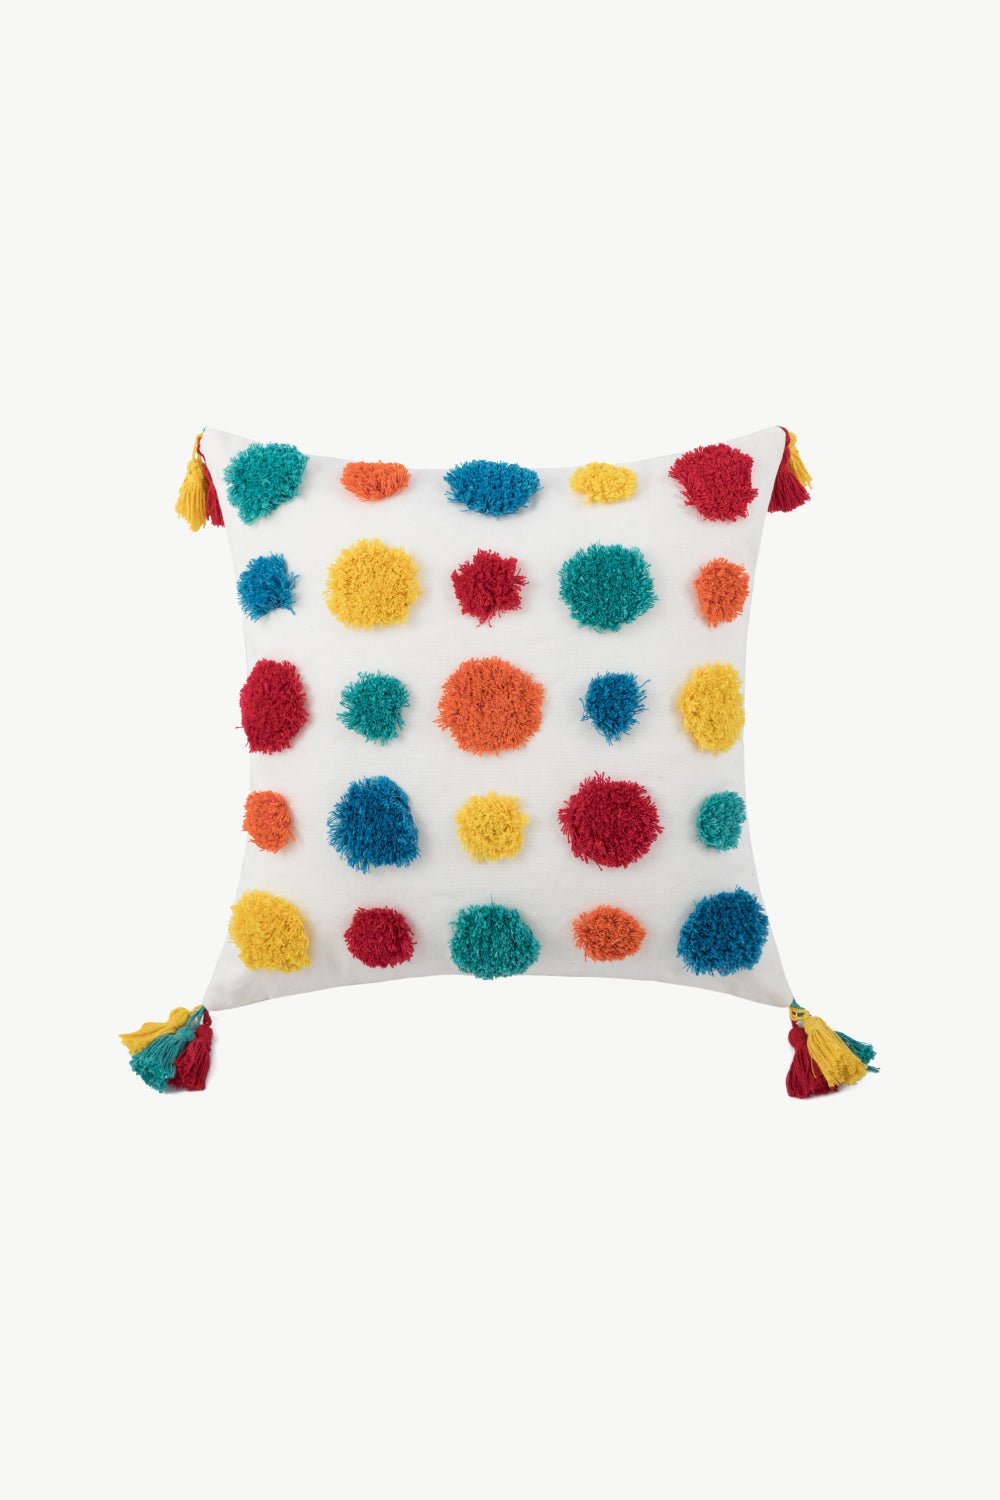 6 Styles Multicolored Pillow Cover - BloomBliss.com